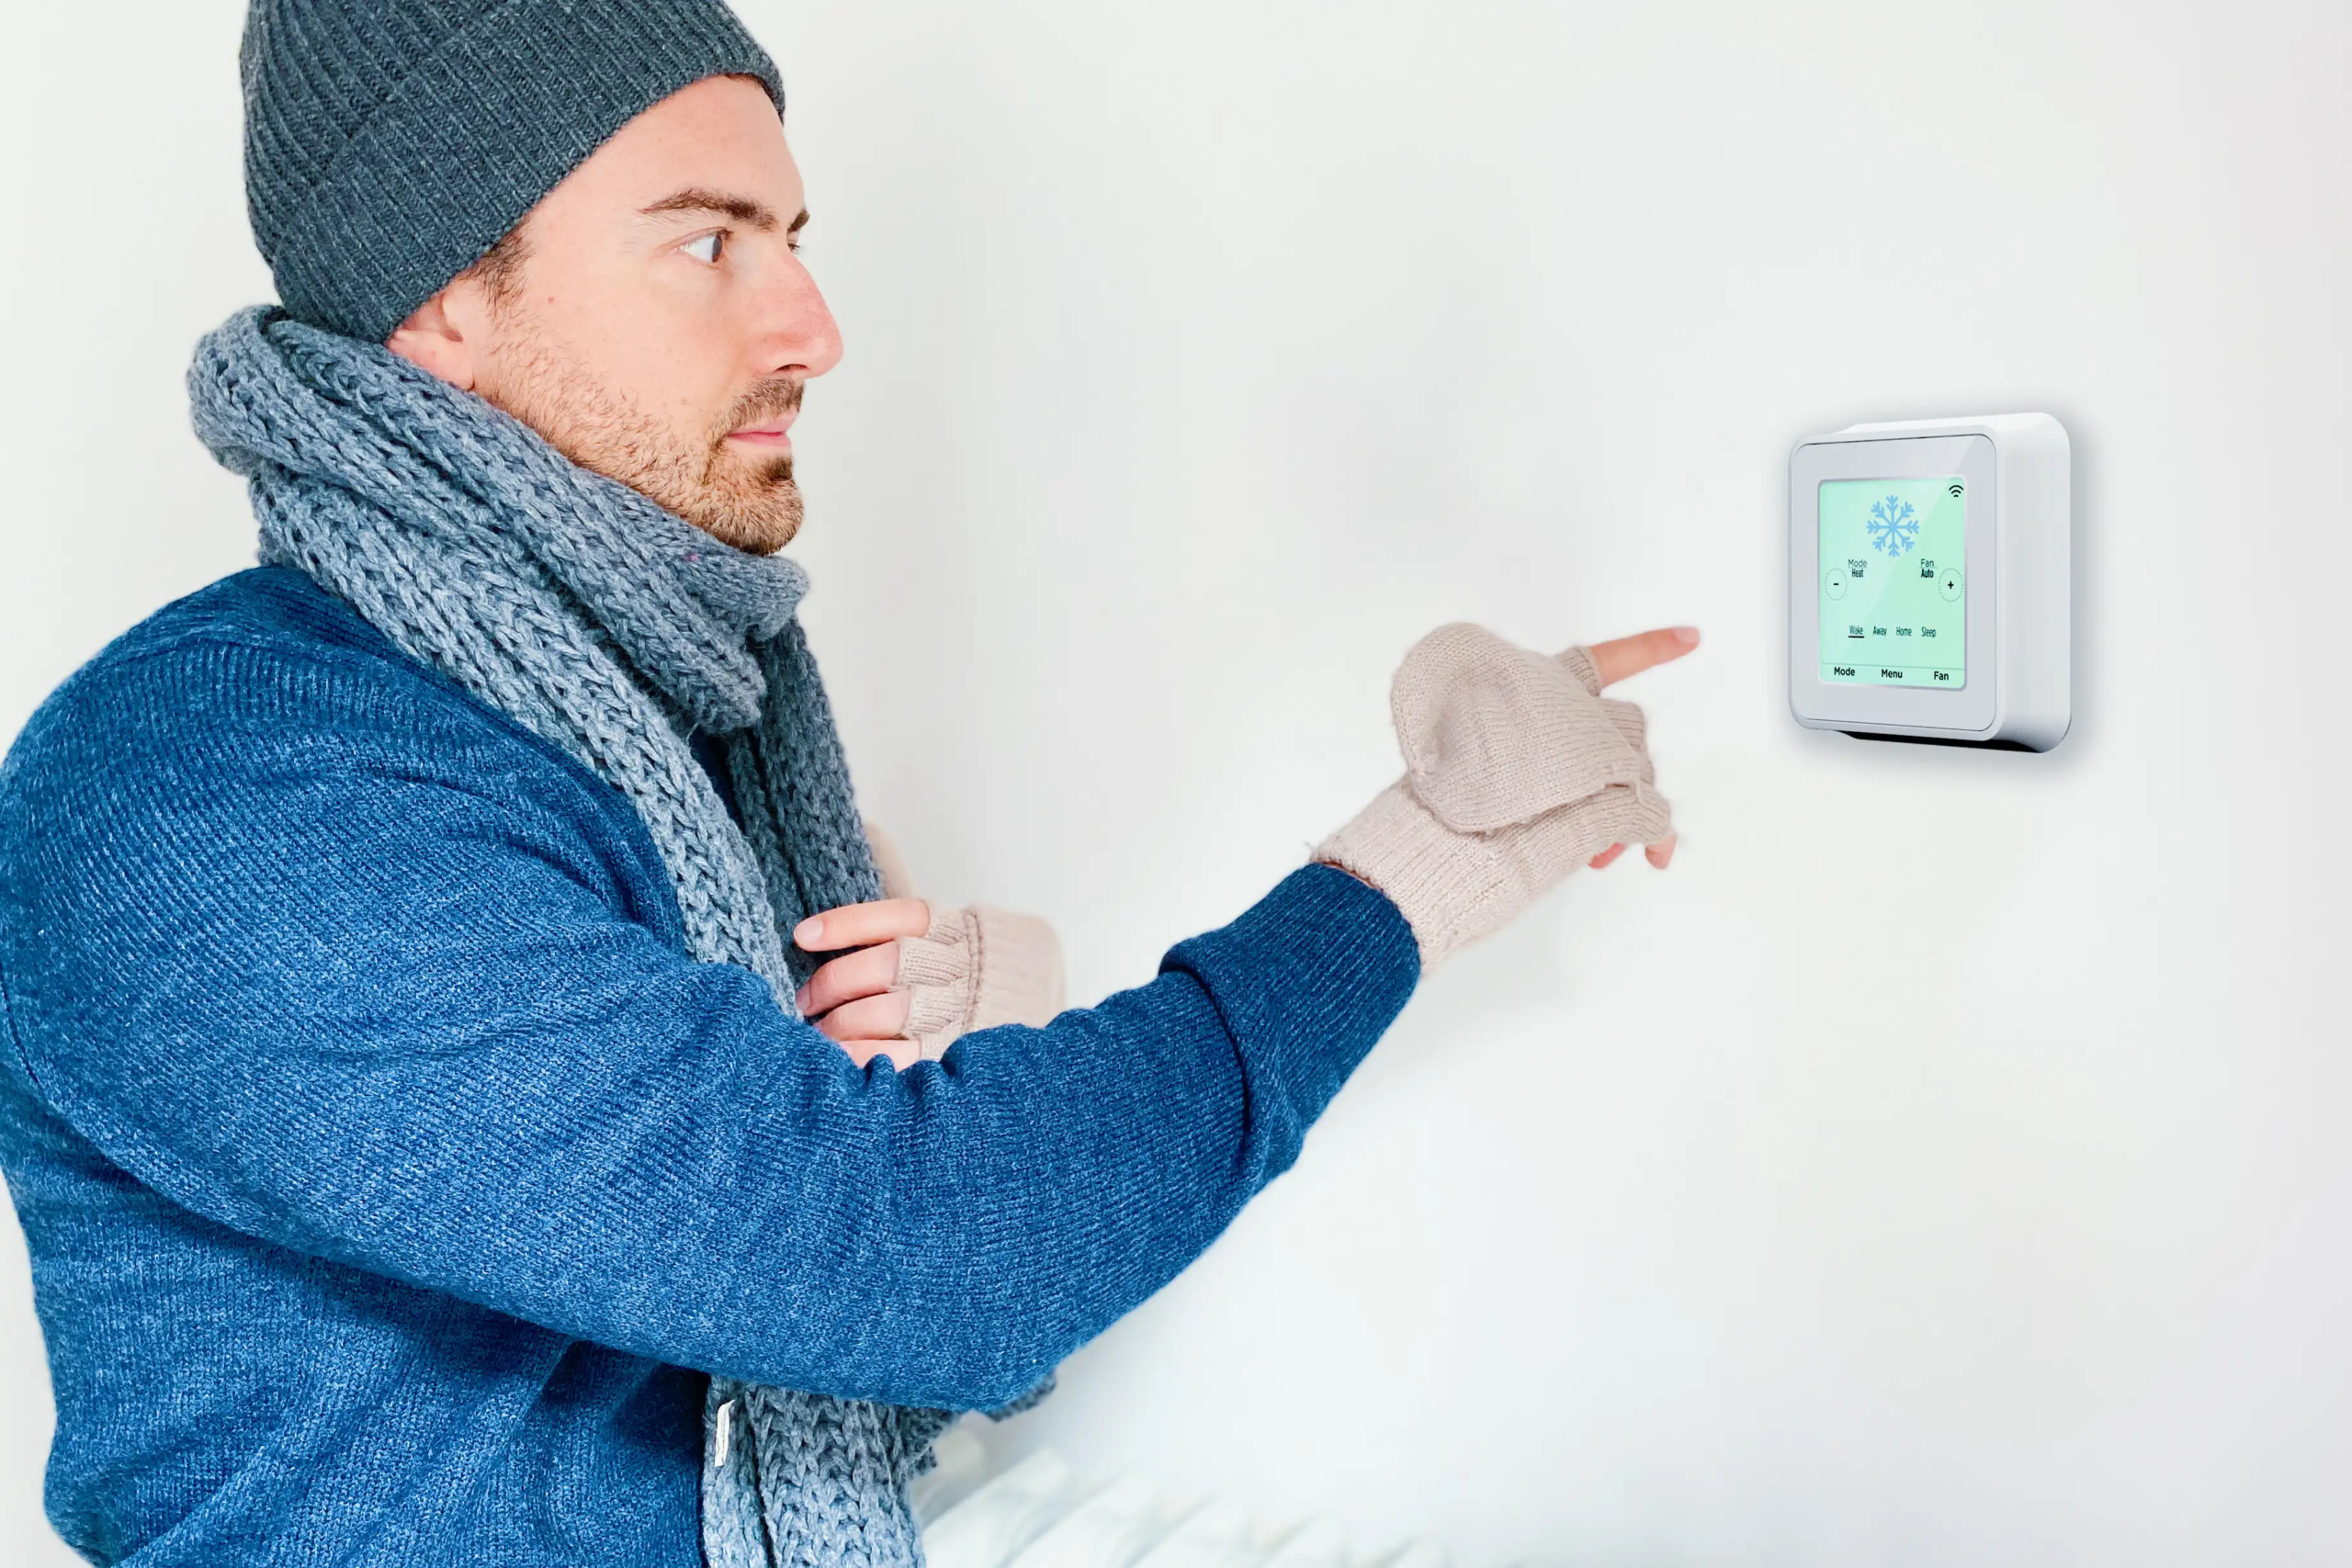 Thermostat Wars – Living with a Temperature Sensitive Person